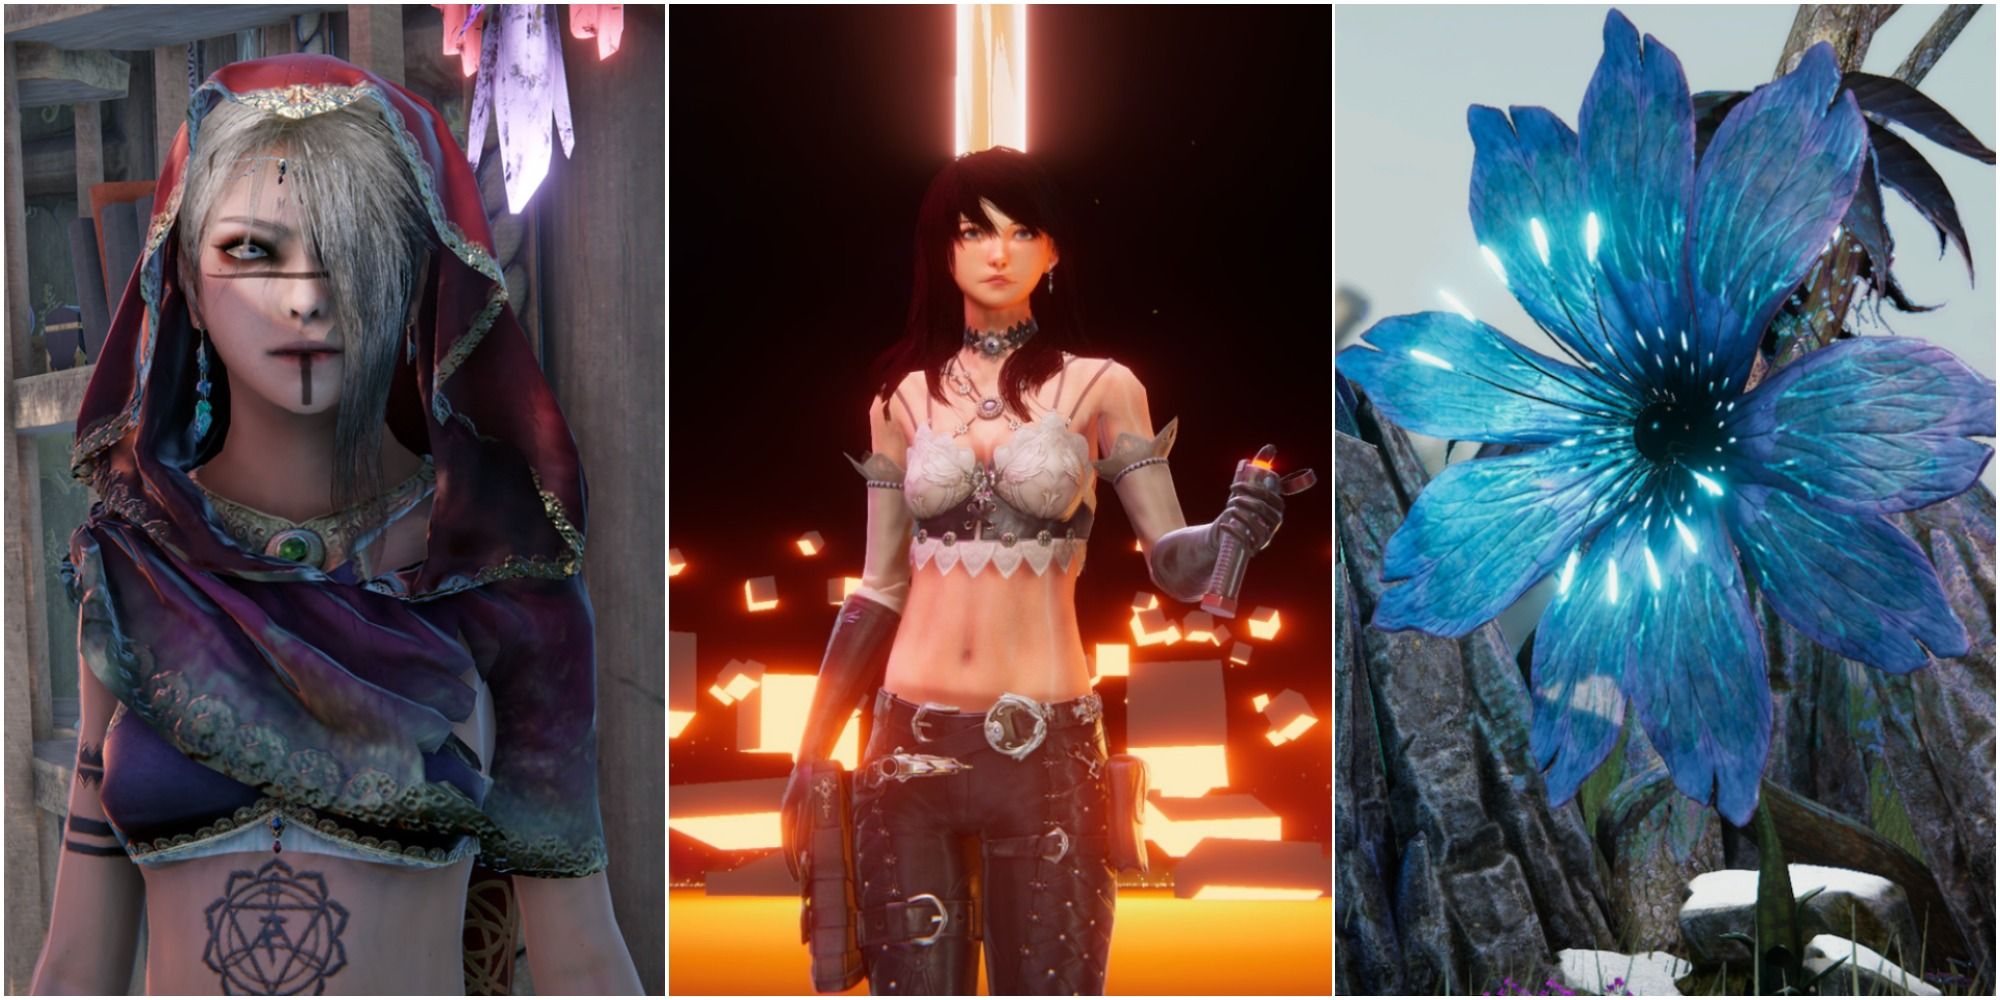 Edge of Eternity Characters on the left is Myrna, in the middle is Fallon and on the right is Flavio